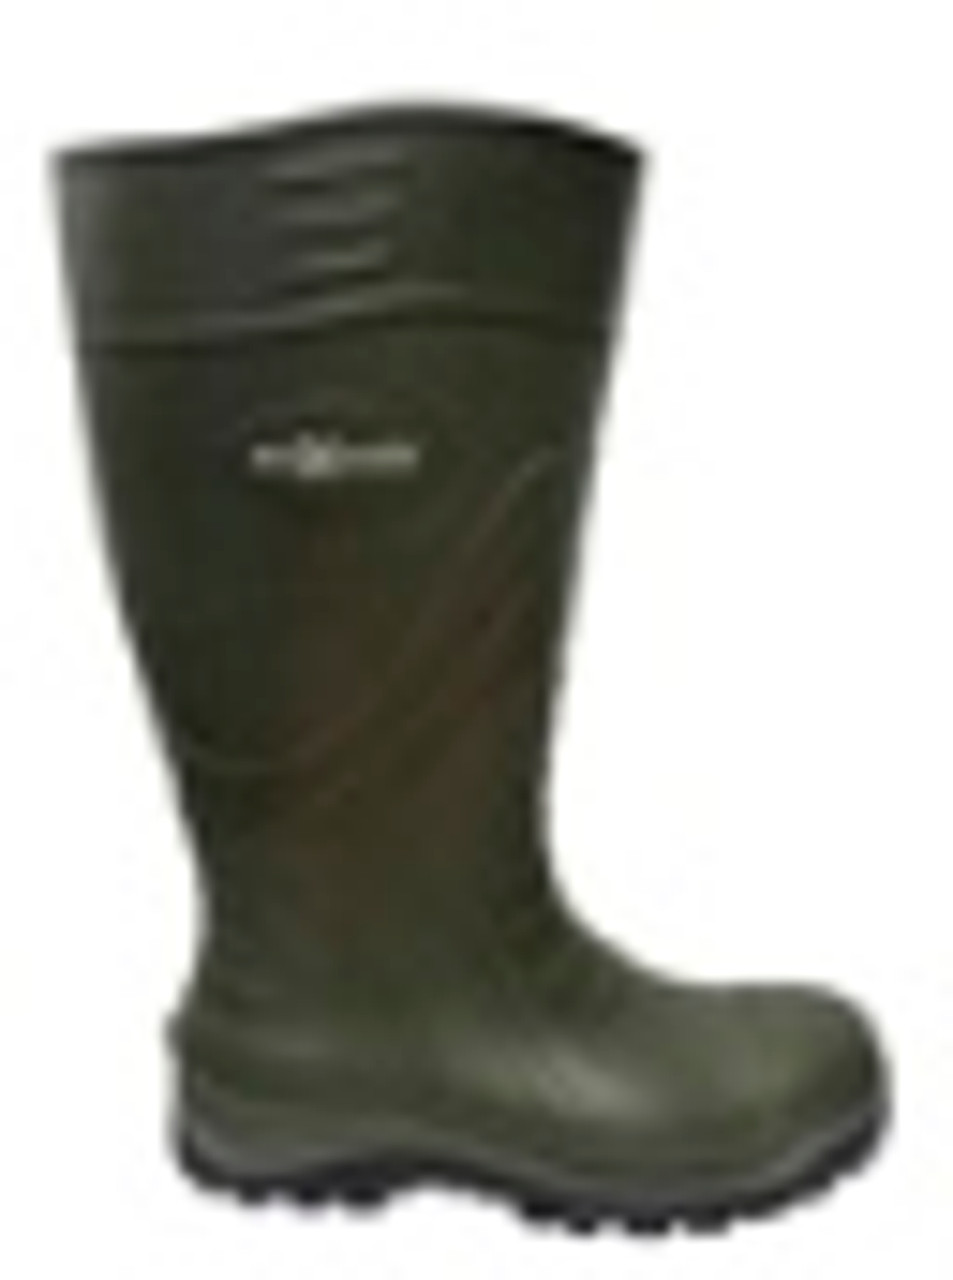 Patrol Green Pu Boot W/ Safety Toe, Size 8